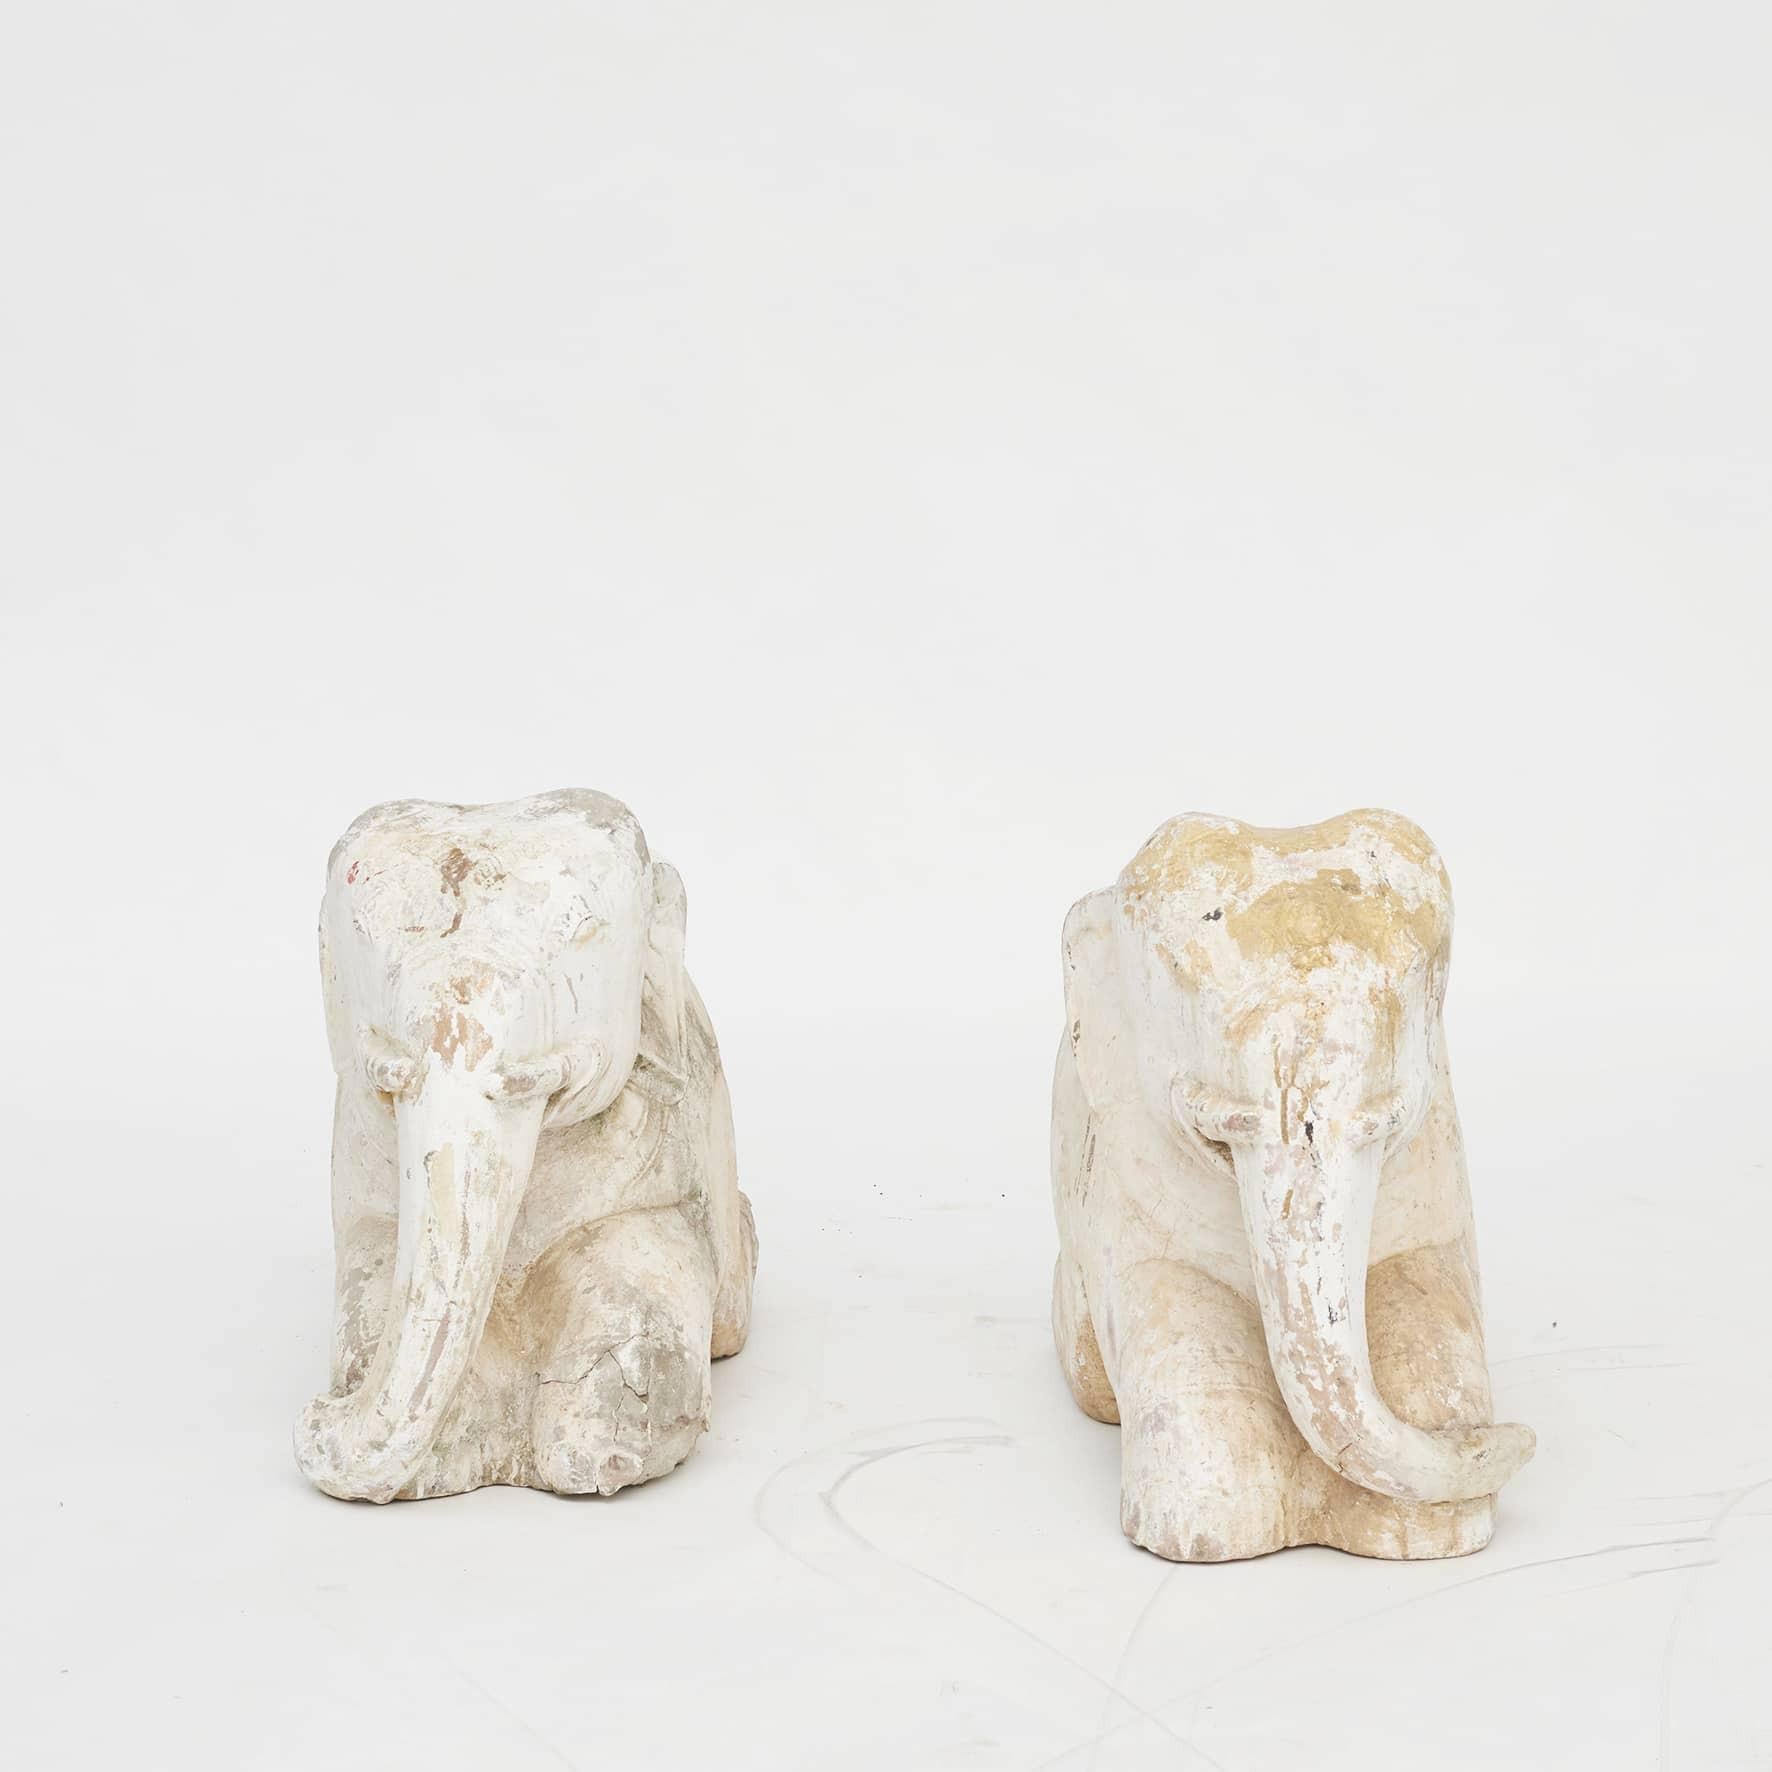 Pair of rare 18th century temple elephants carved in sandstone with chalk and leftovers of gold leaf.
Chalking is used as a surface to bind gold leaf. Originally fully covered with gold leaf.
Elephants have a God status and are the guardians of